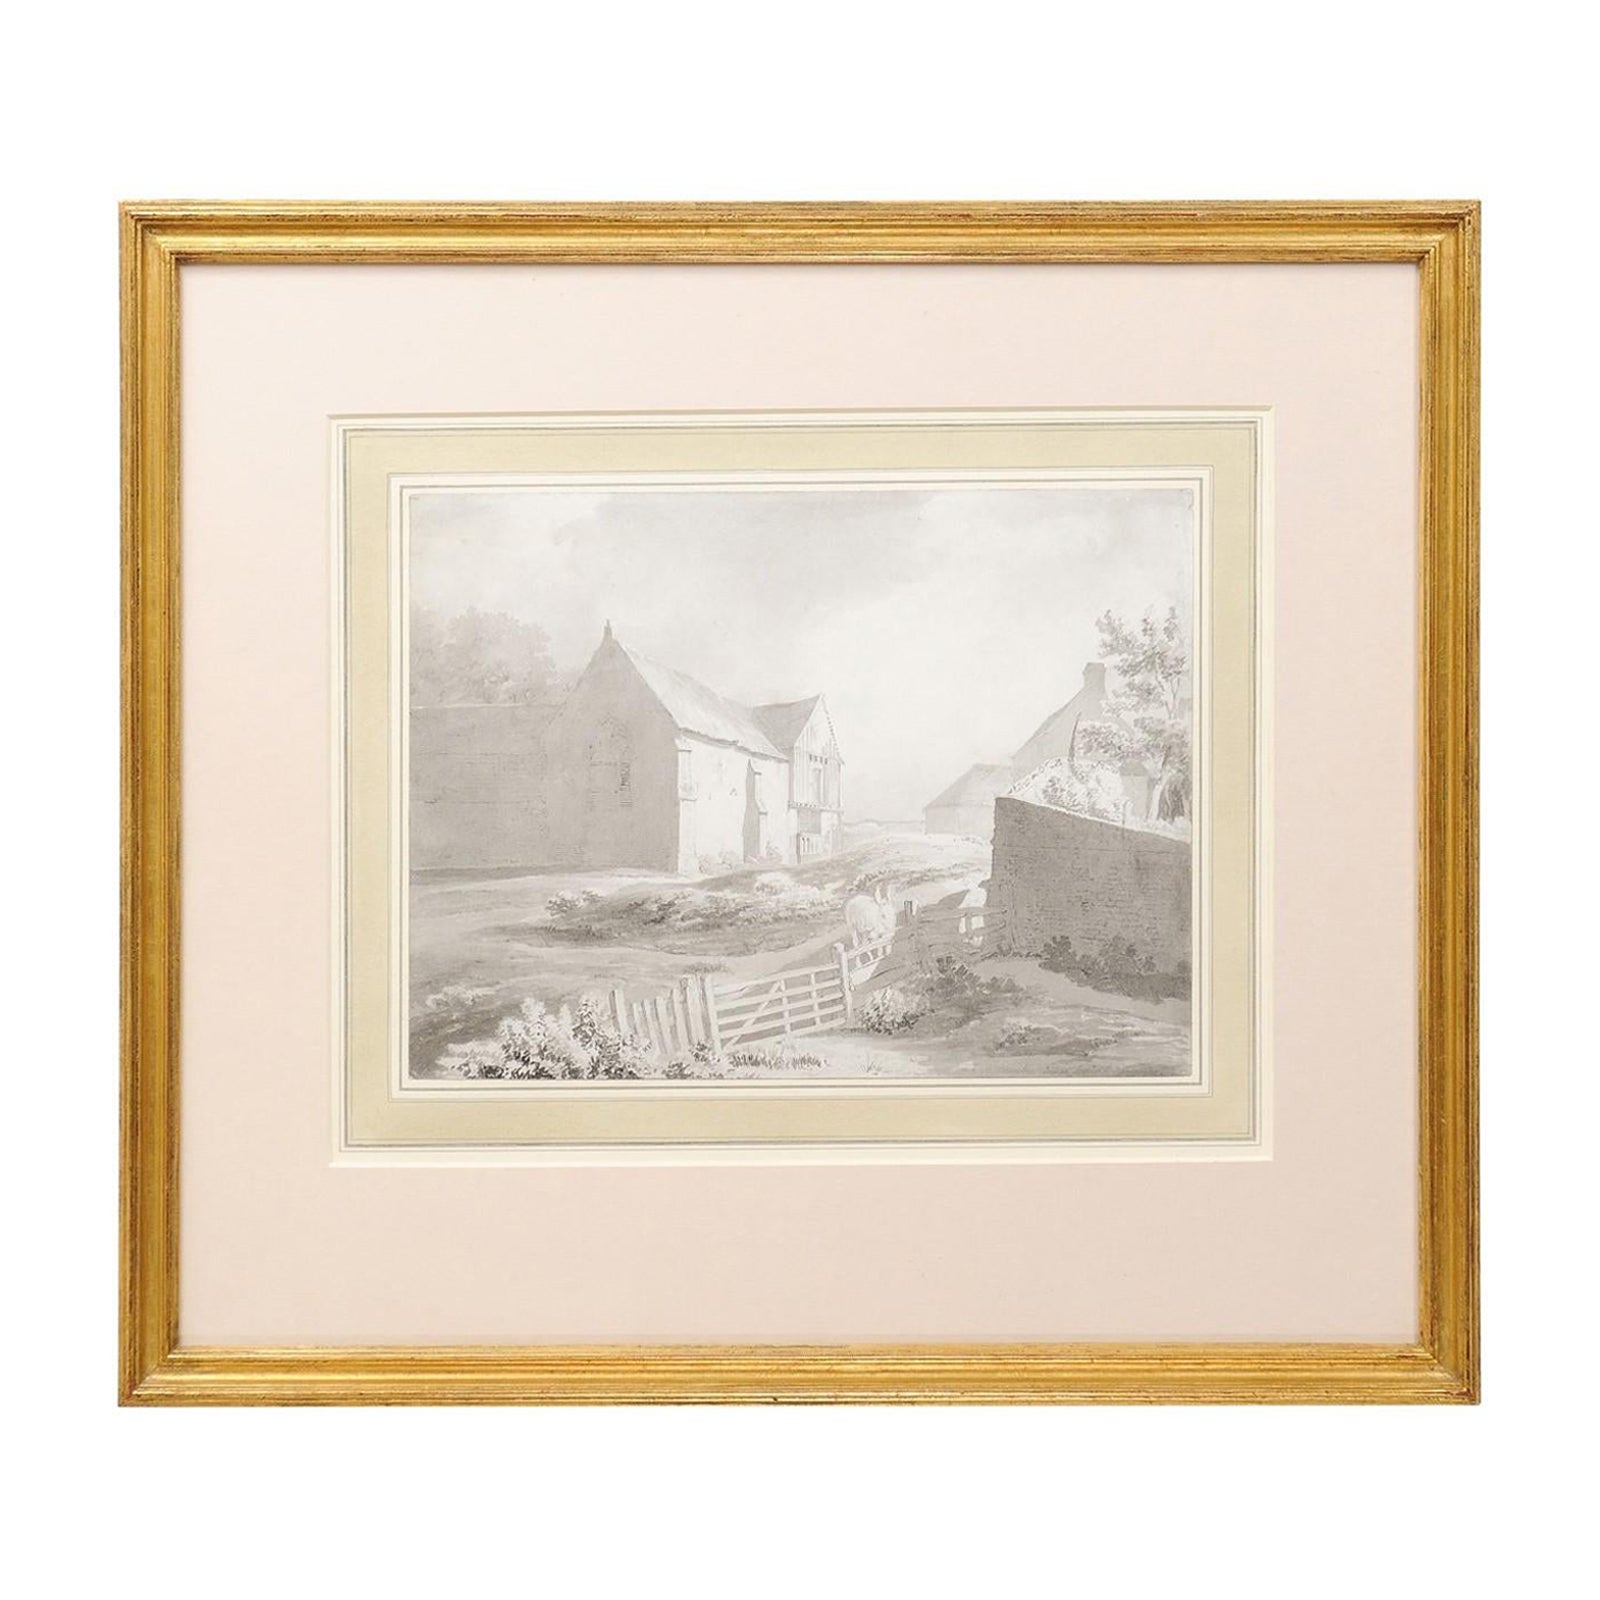 18th Century English Grisaille Ink & Watercolor Landscape Scene in Gilt Frame